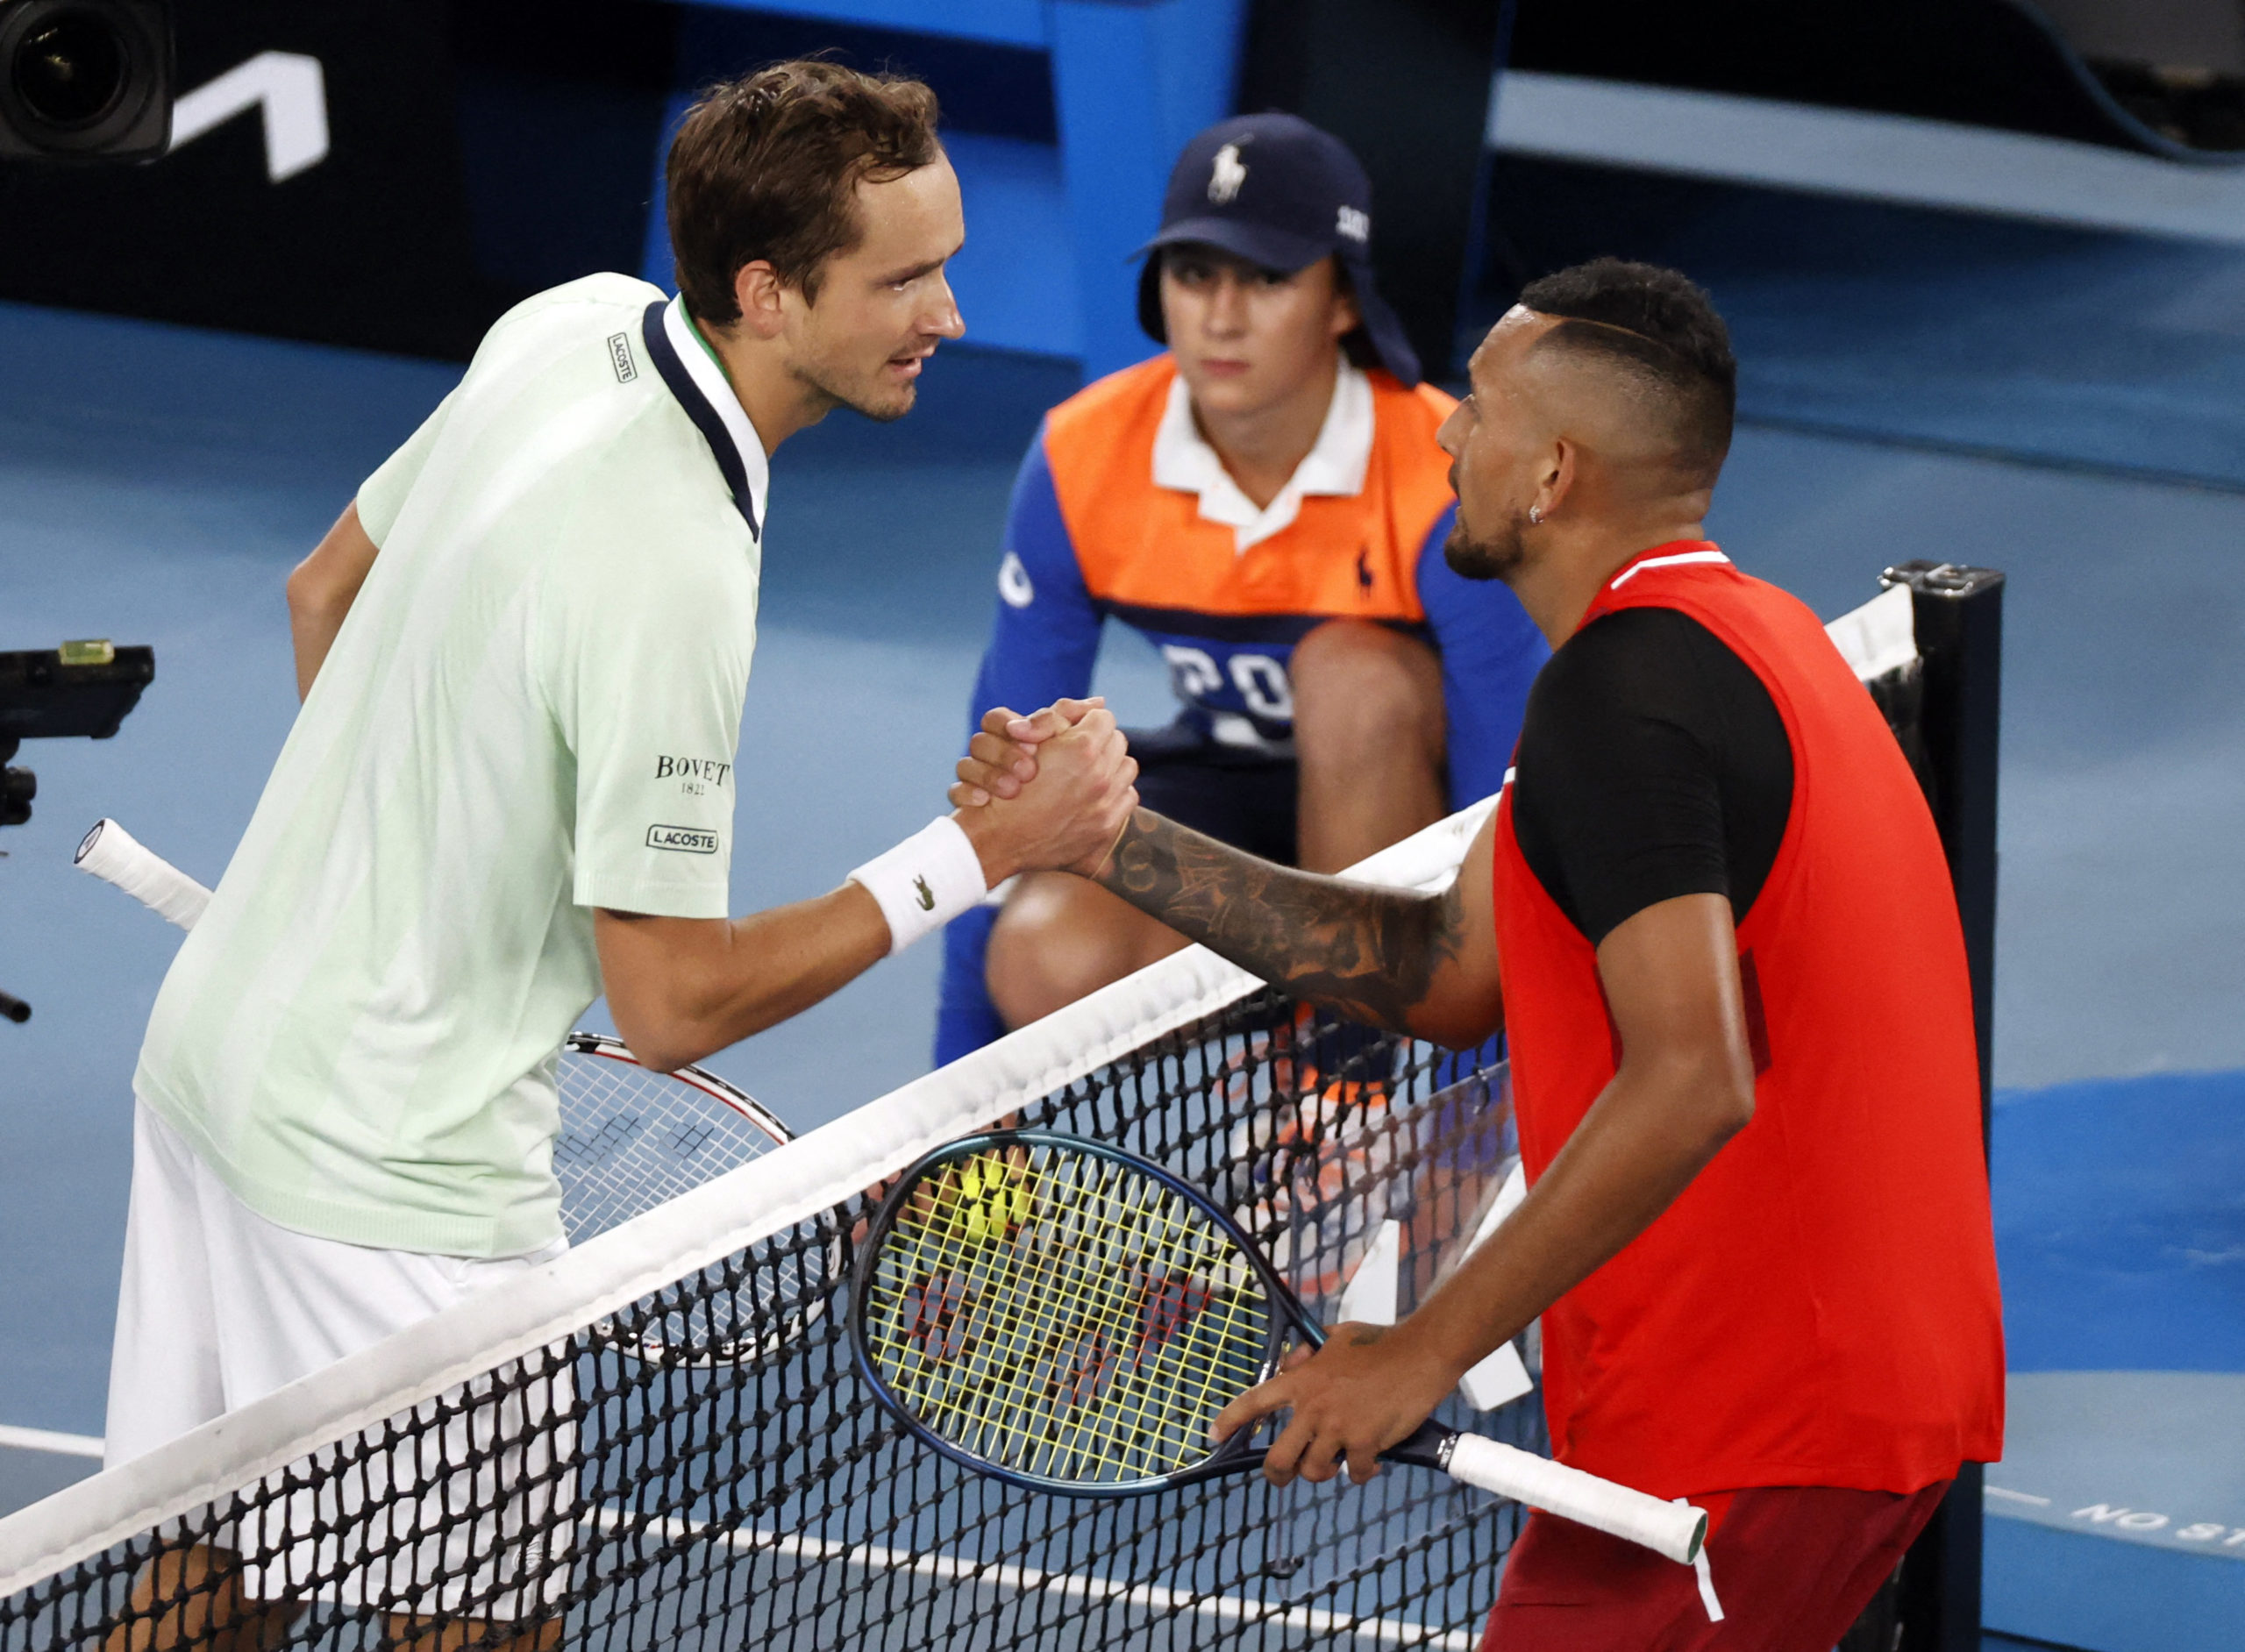 Tennis - Australian Open - Melbourne Park, Melbourne, Australia - January 20, 2022 Russia's Daniil Medvedev and Australia's Nick Kyrgios shake hands after their second round match